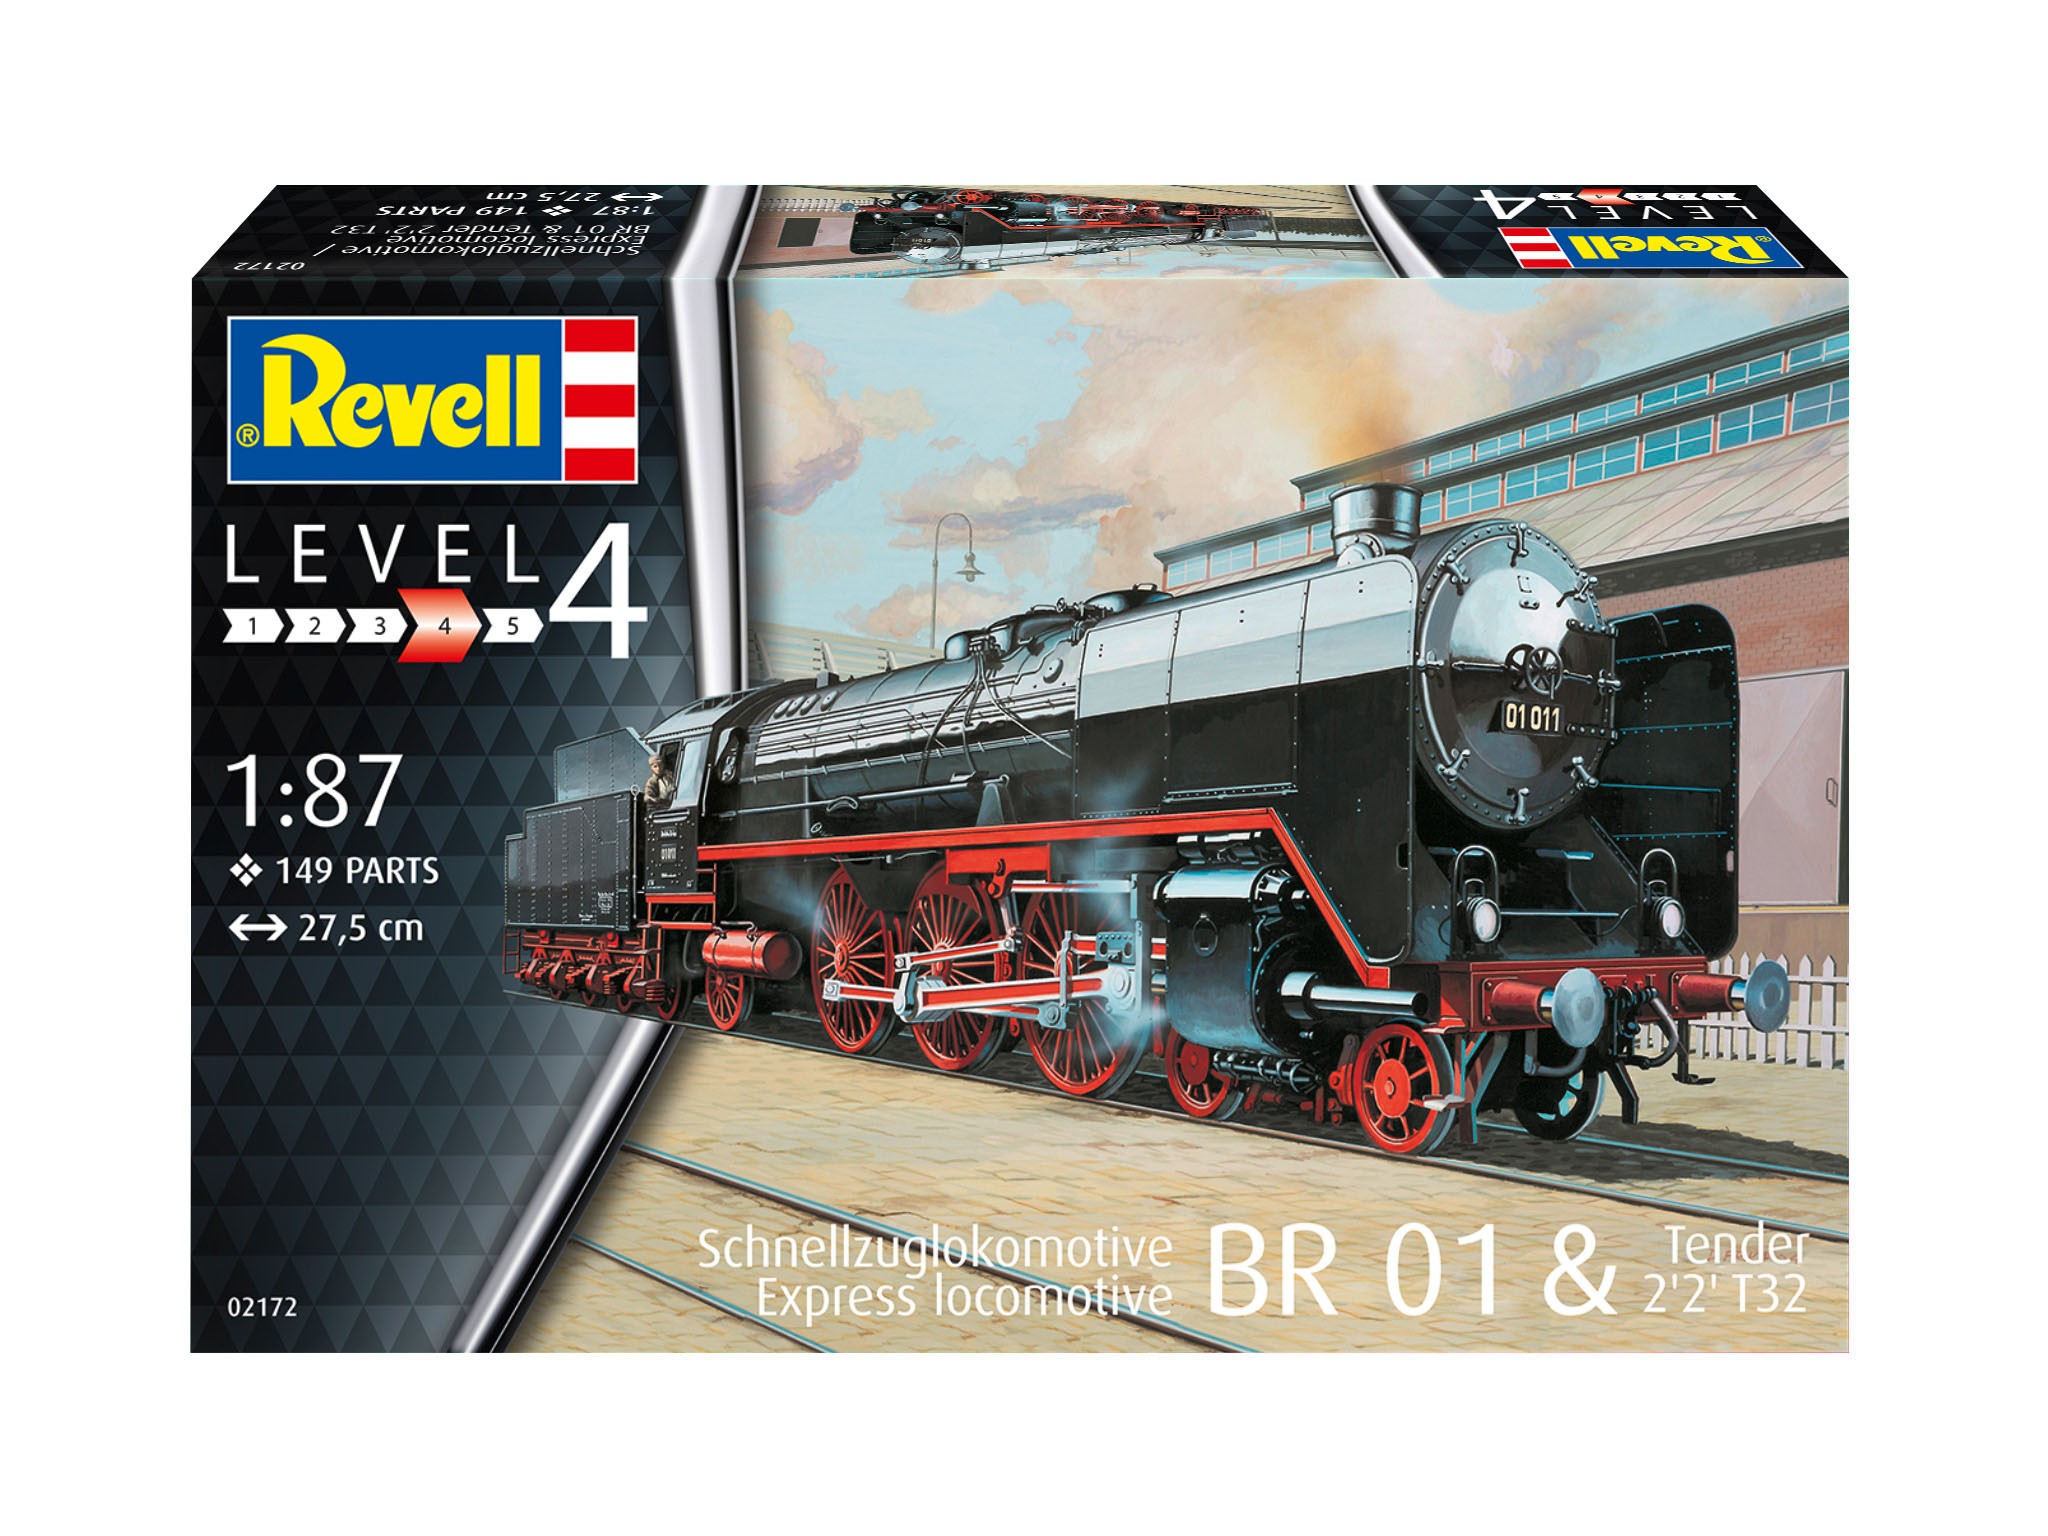 Revell 02172 Express locomotive BR01 with tender 2'2' T32  1:87